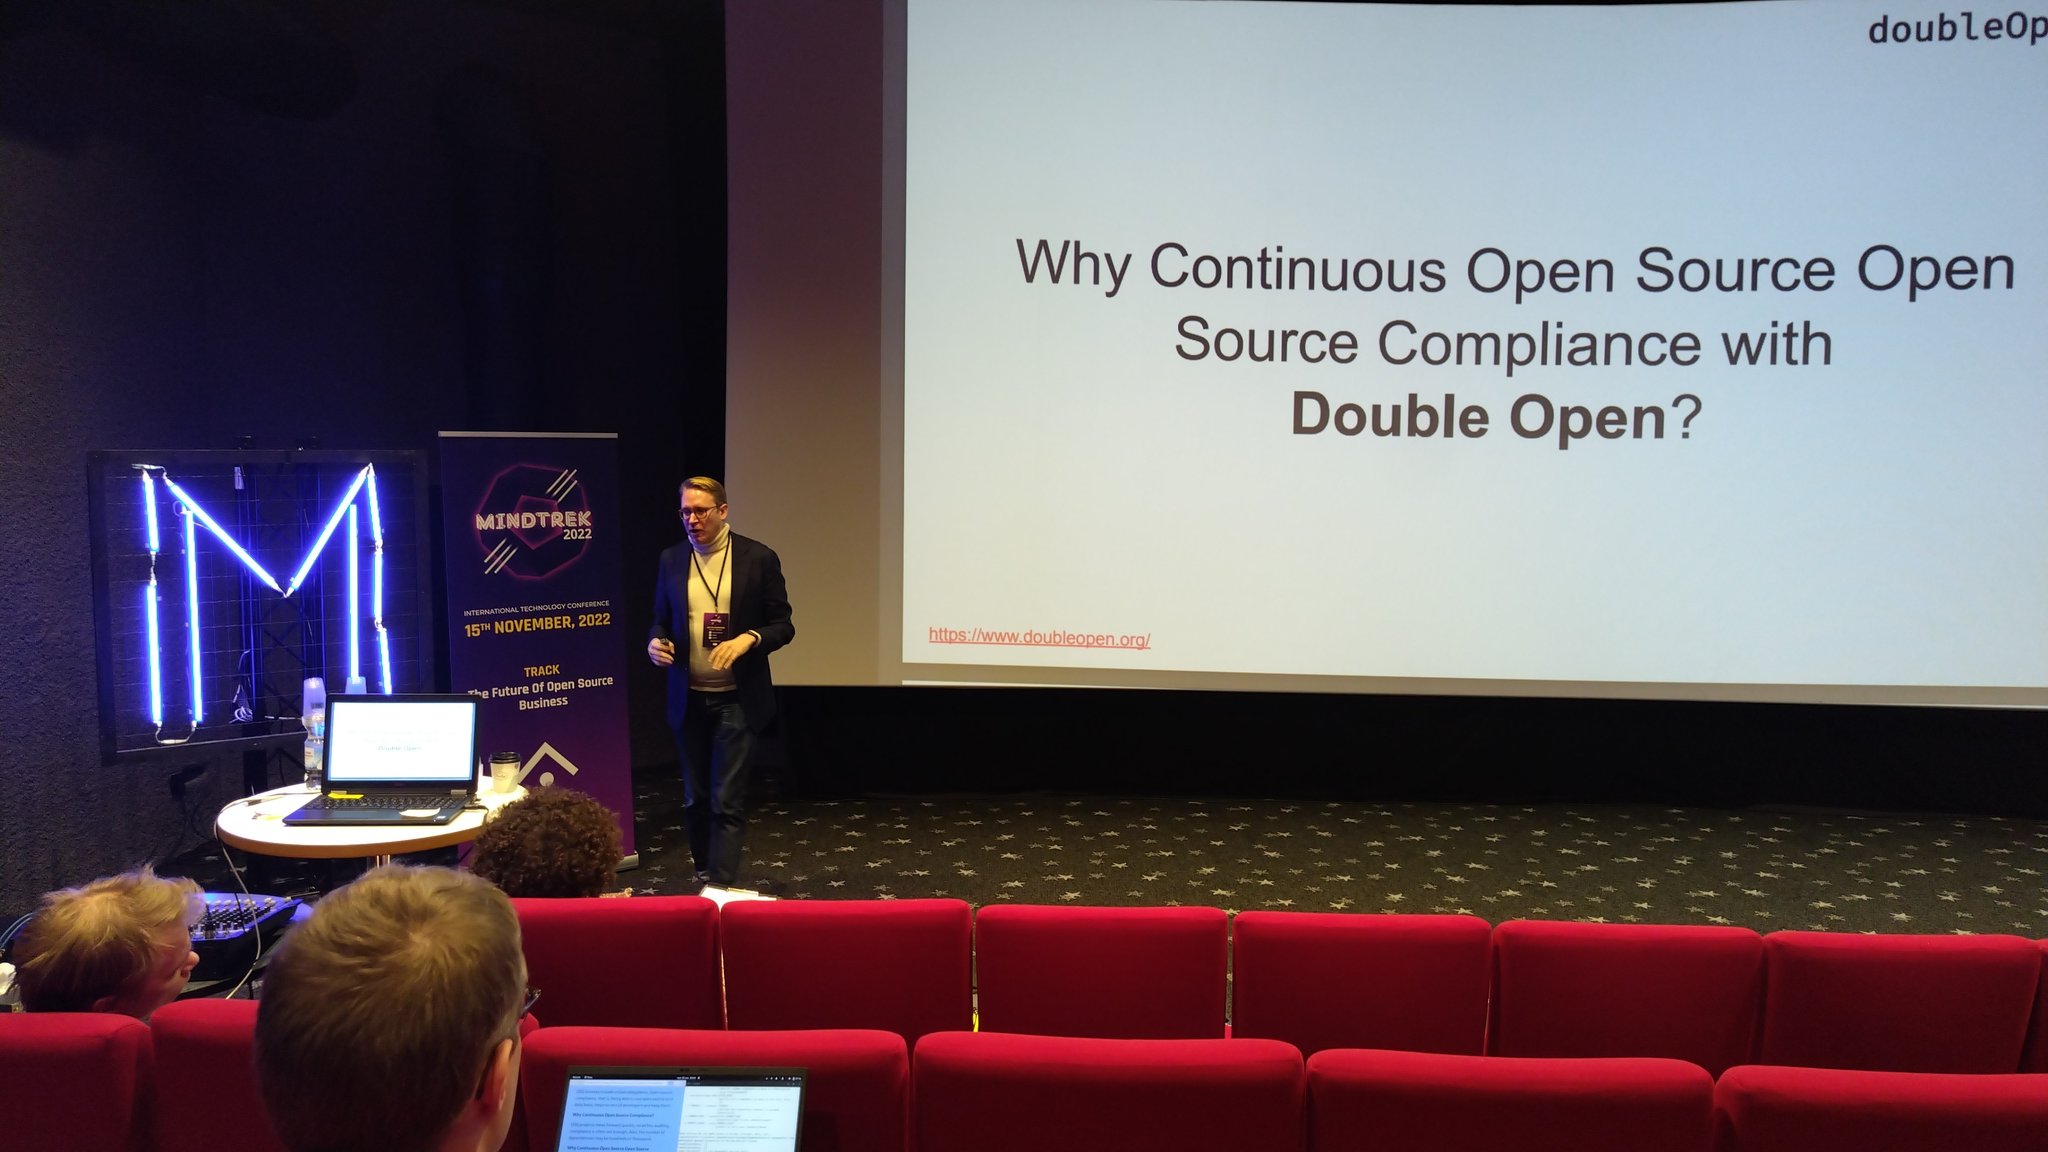 Double Open can help both in technical setup, as well as setting up the license policy. To achieve continuous compliance. Speaker: Mikko Murto.